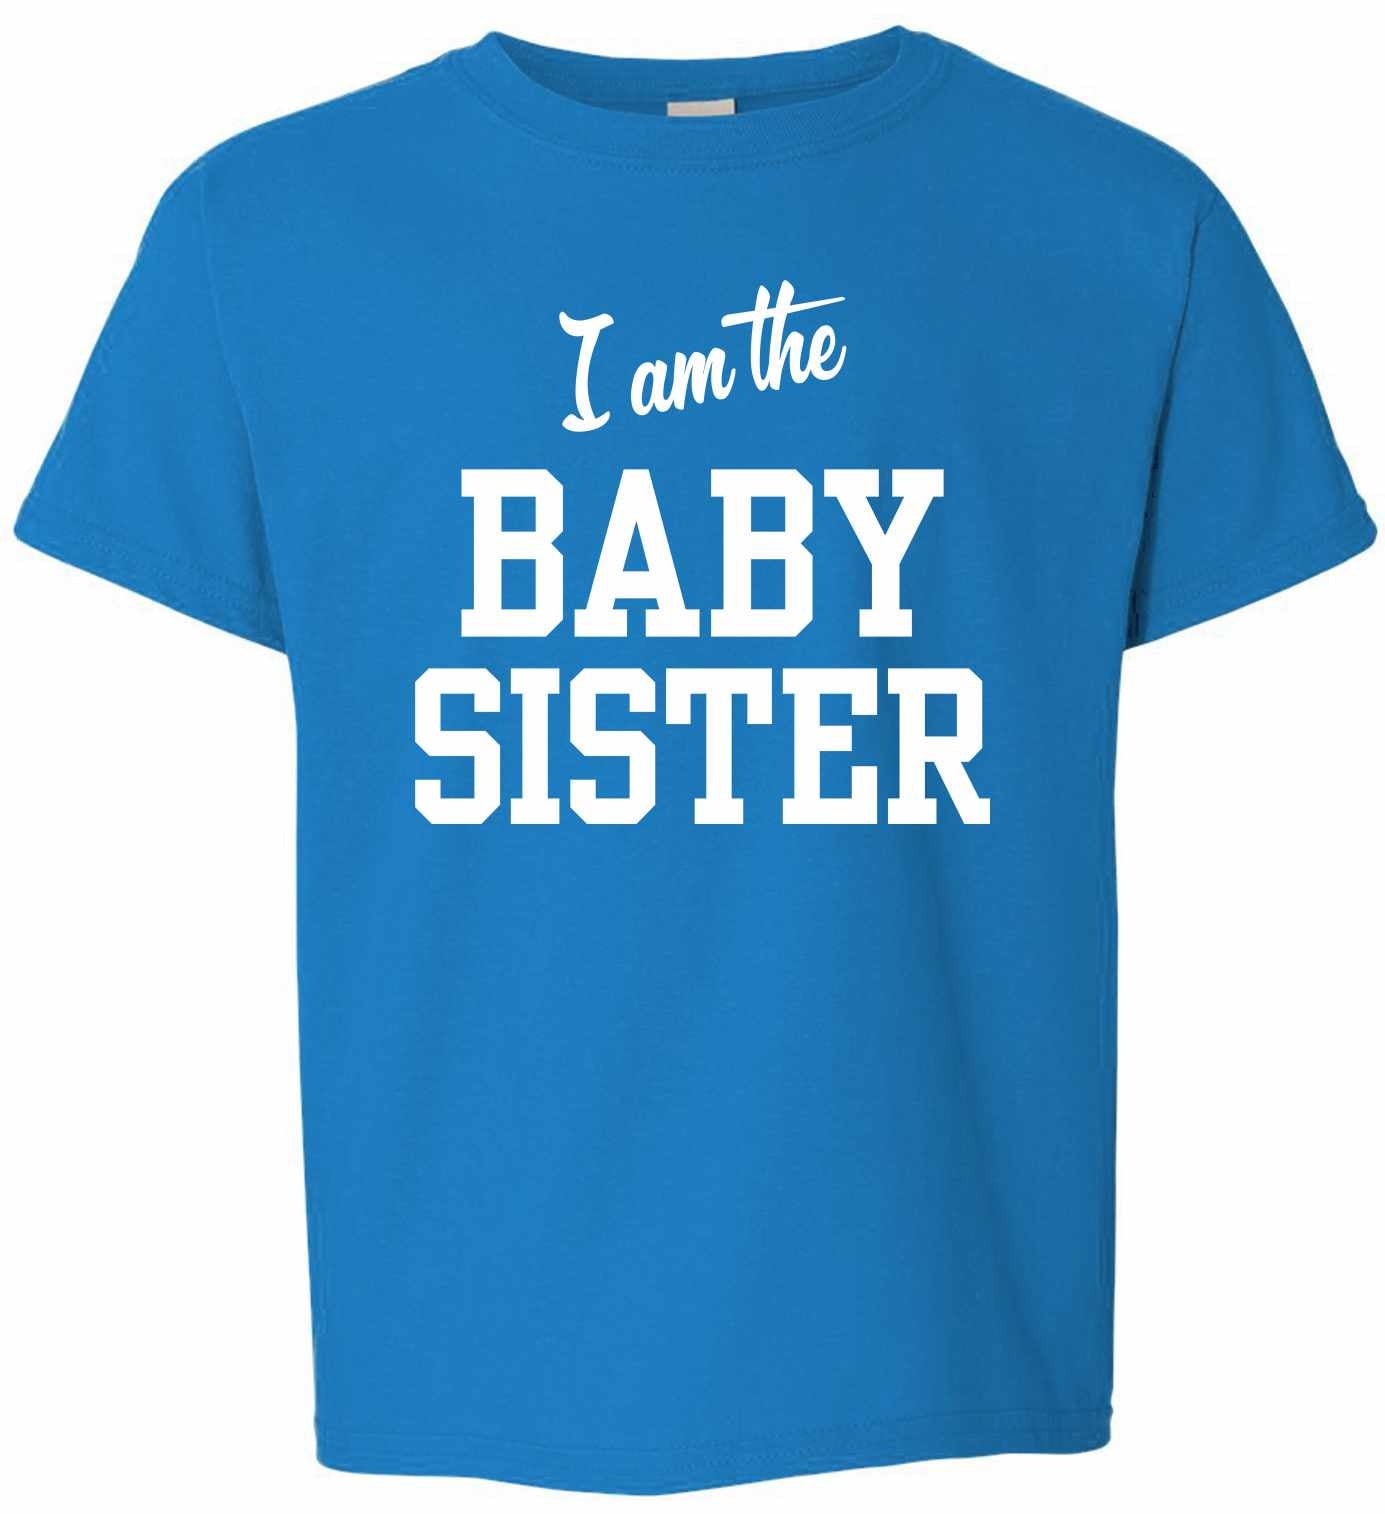 I am the Baby Sister on Kids T-Shirt